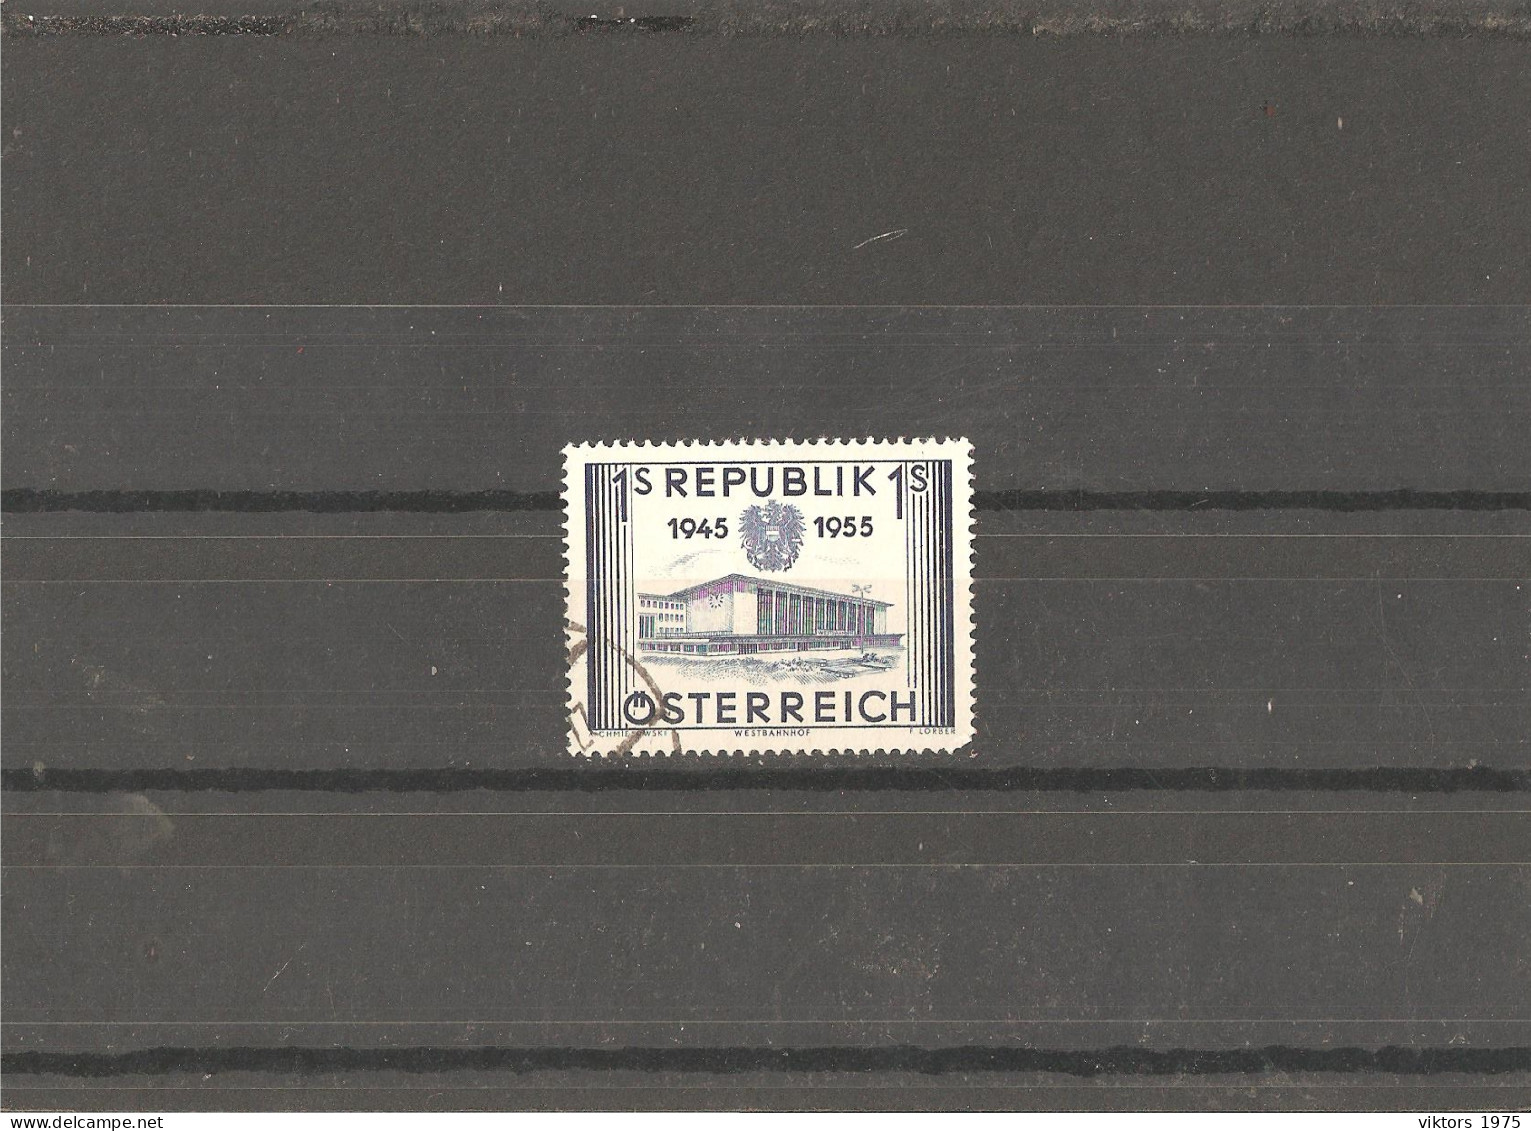 Used Stamp Nr.1013 In MICHEL Catalog - Used Stamps